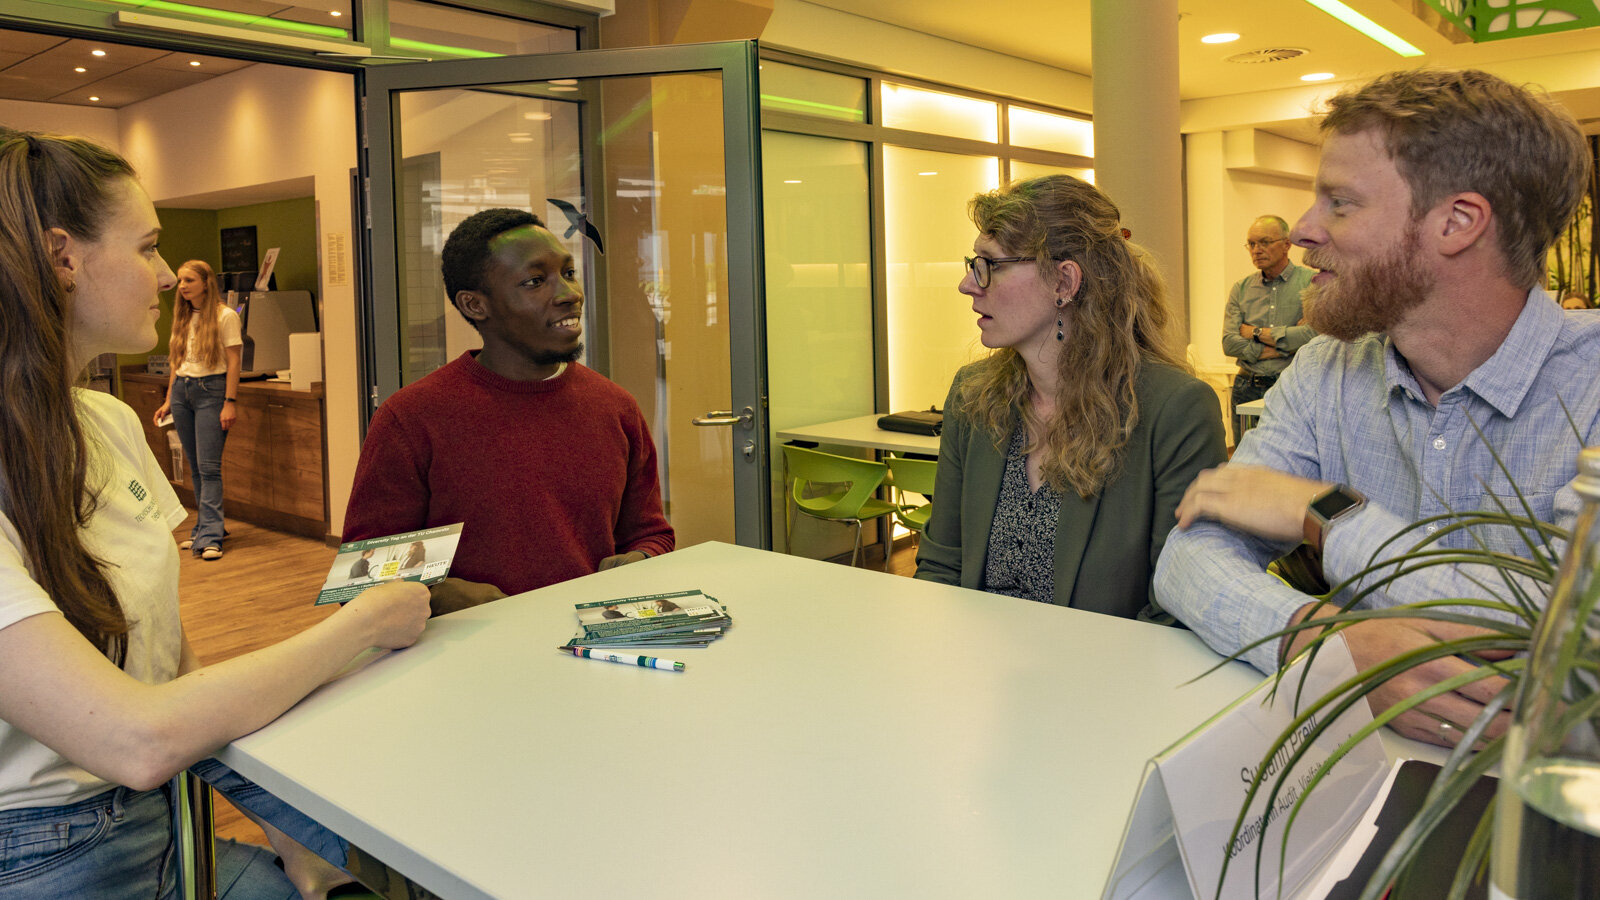 A student in conversation with a staff member of Chemnitz University of Technology.